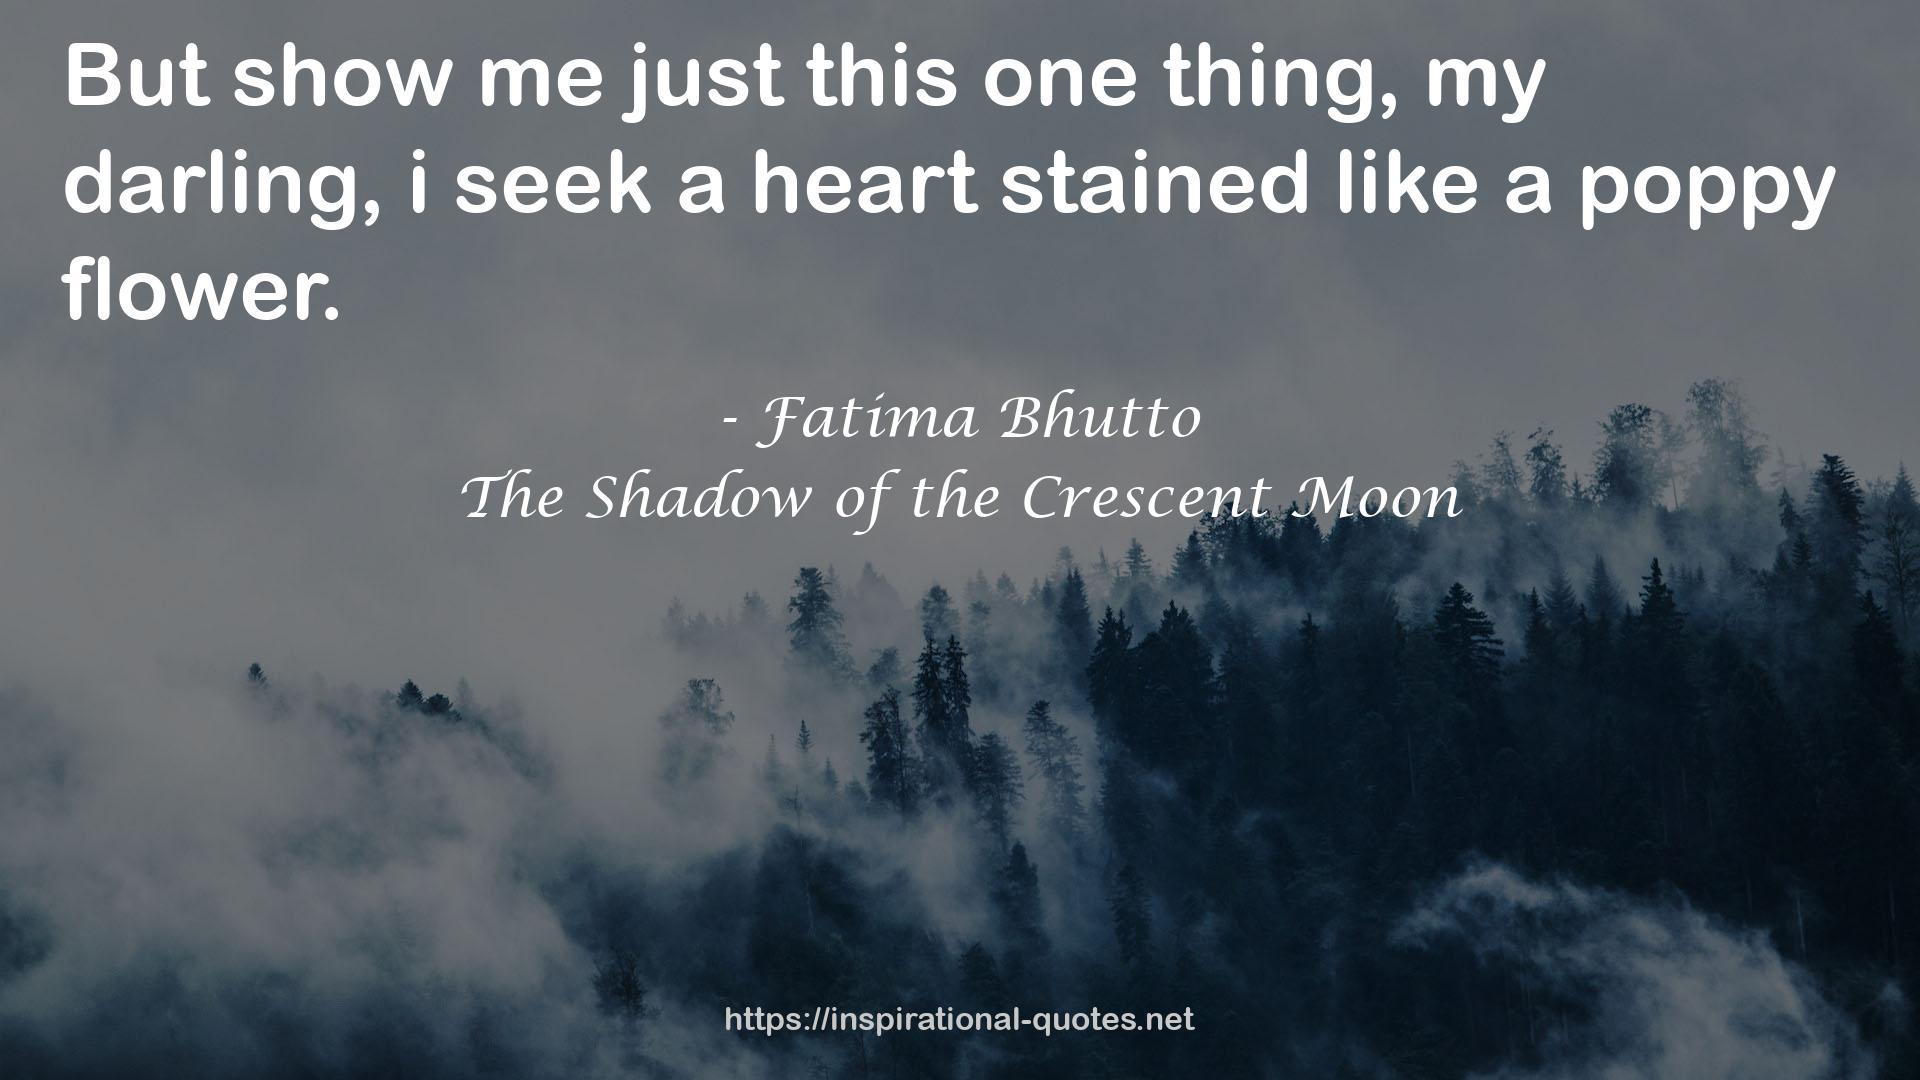 The Shadow of the Crescent Moon QUOTES